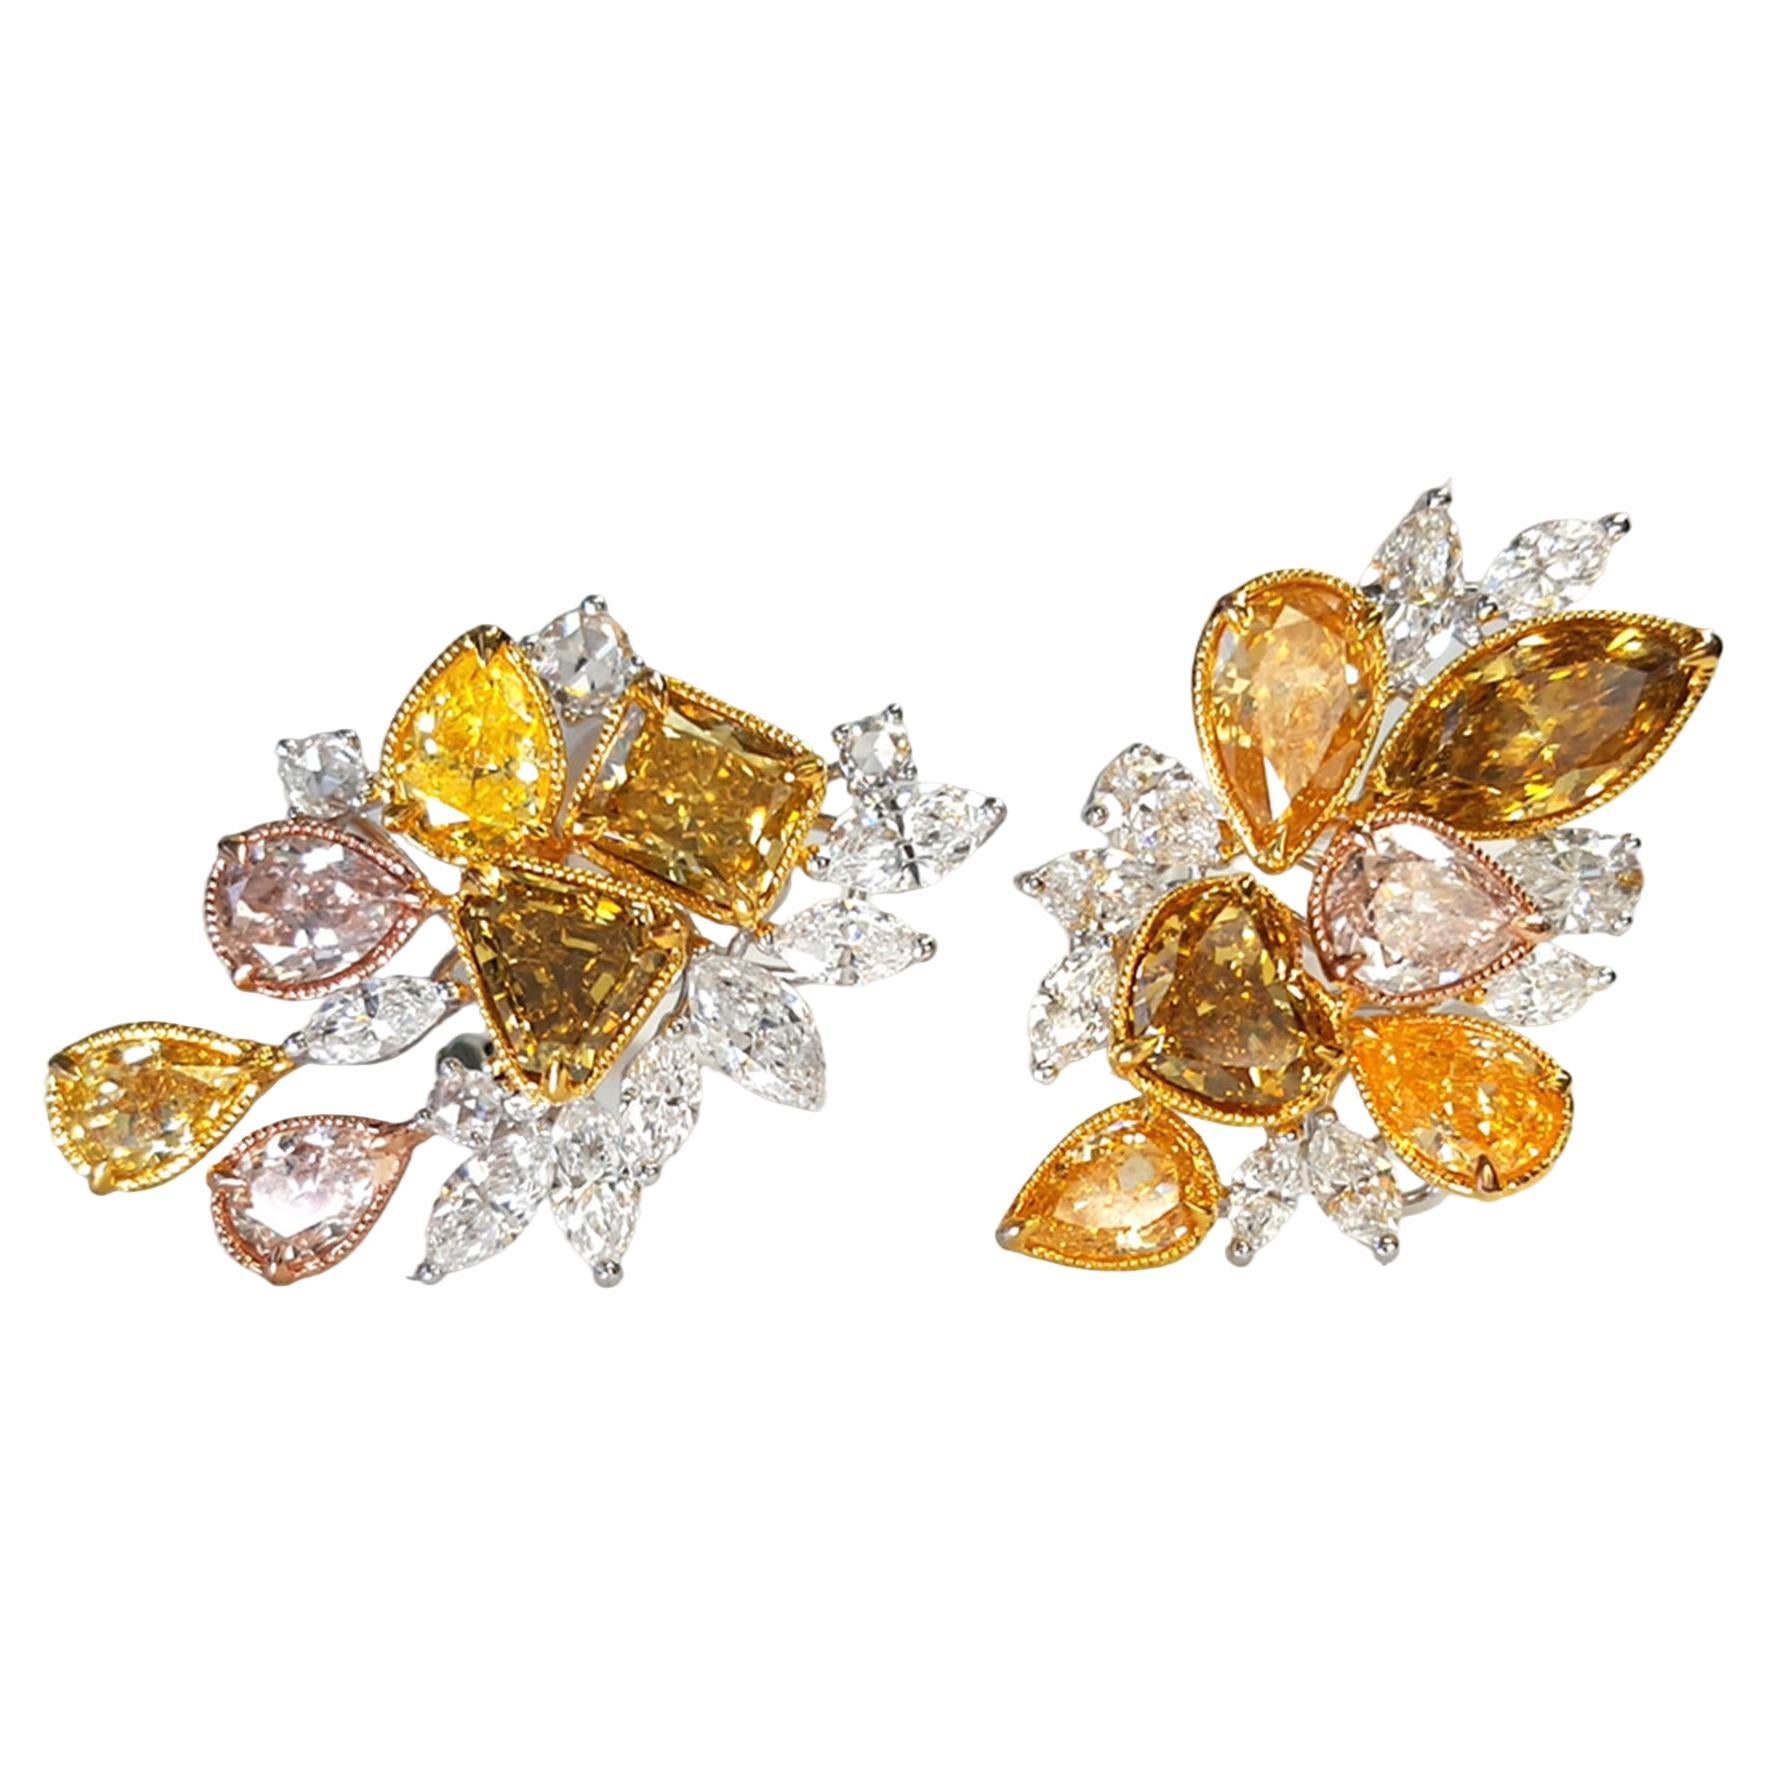 8 Carat Multicolor Diamond Cluster Earrings, 18K white and Yellow Gold